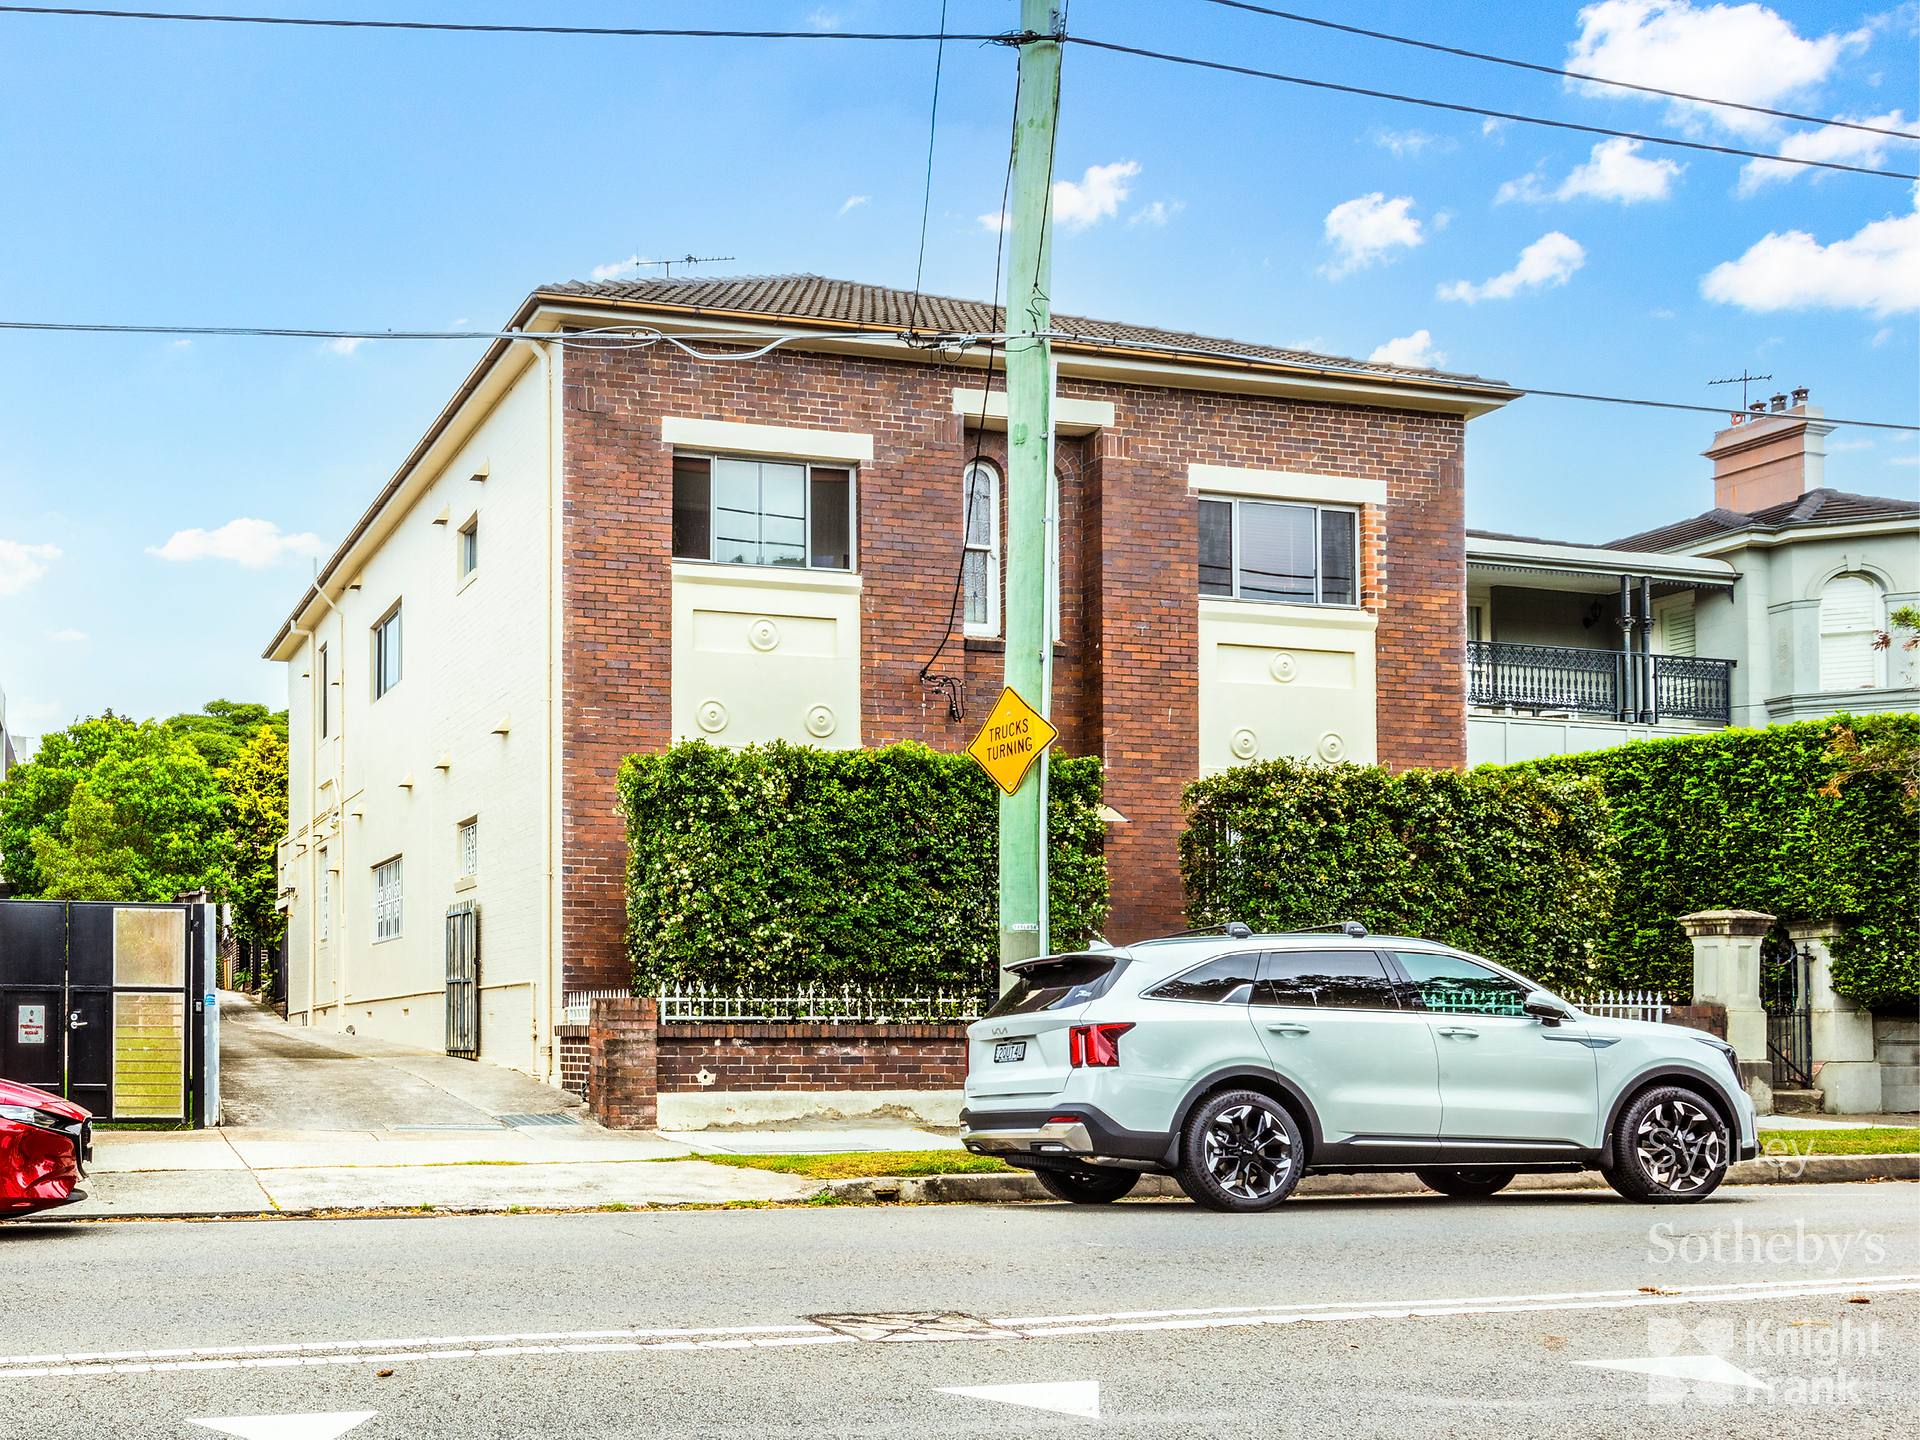 313 Bronte Road, Waverley Sold by Knight Frank Australia - image 1